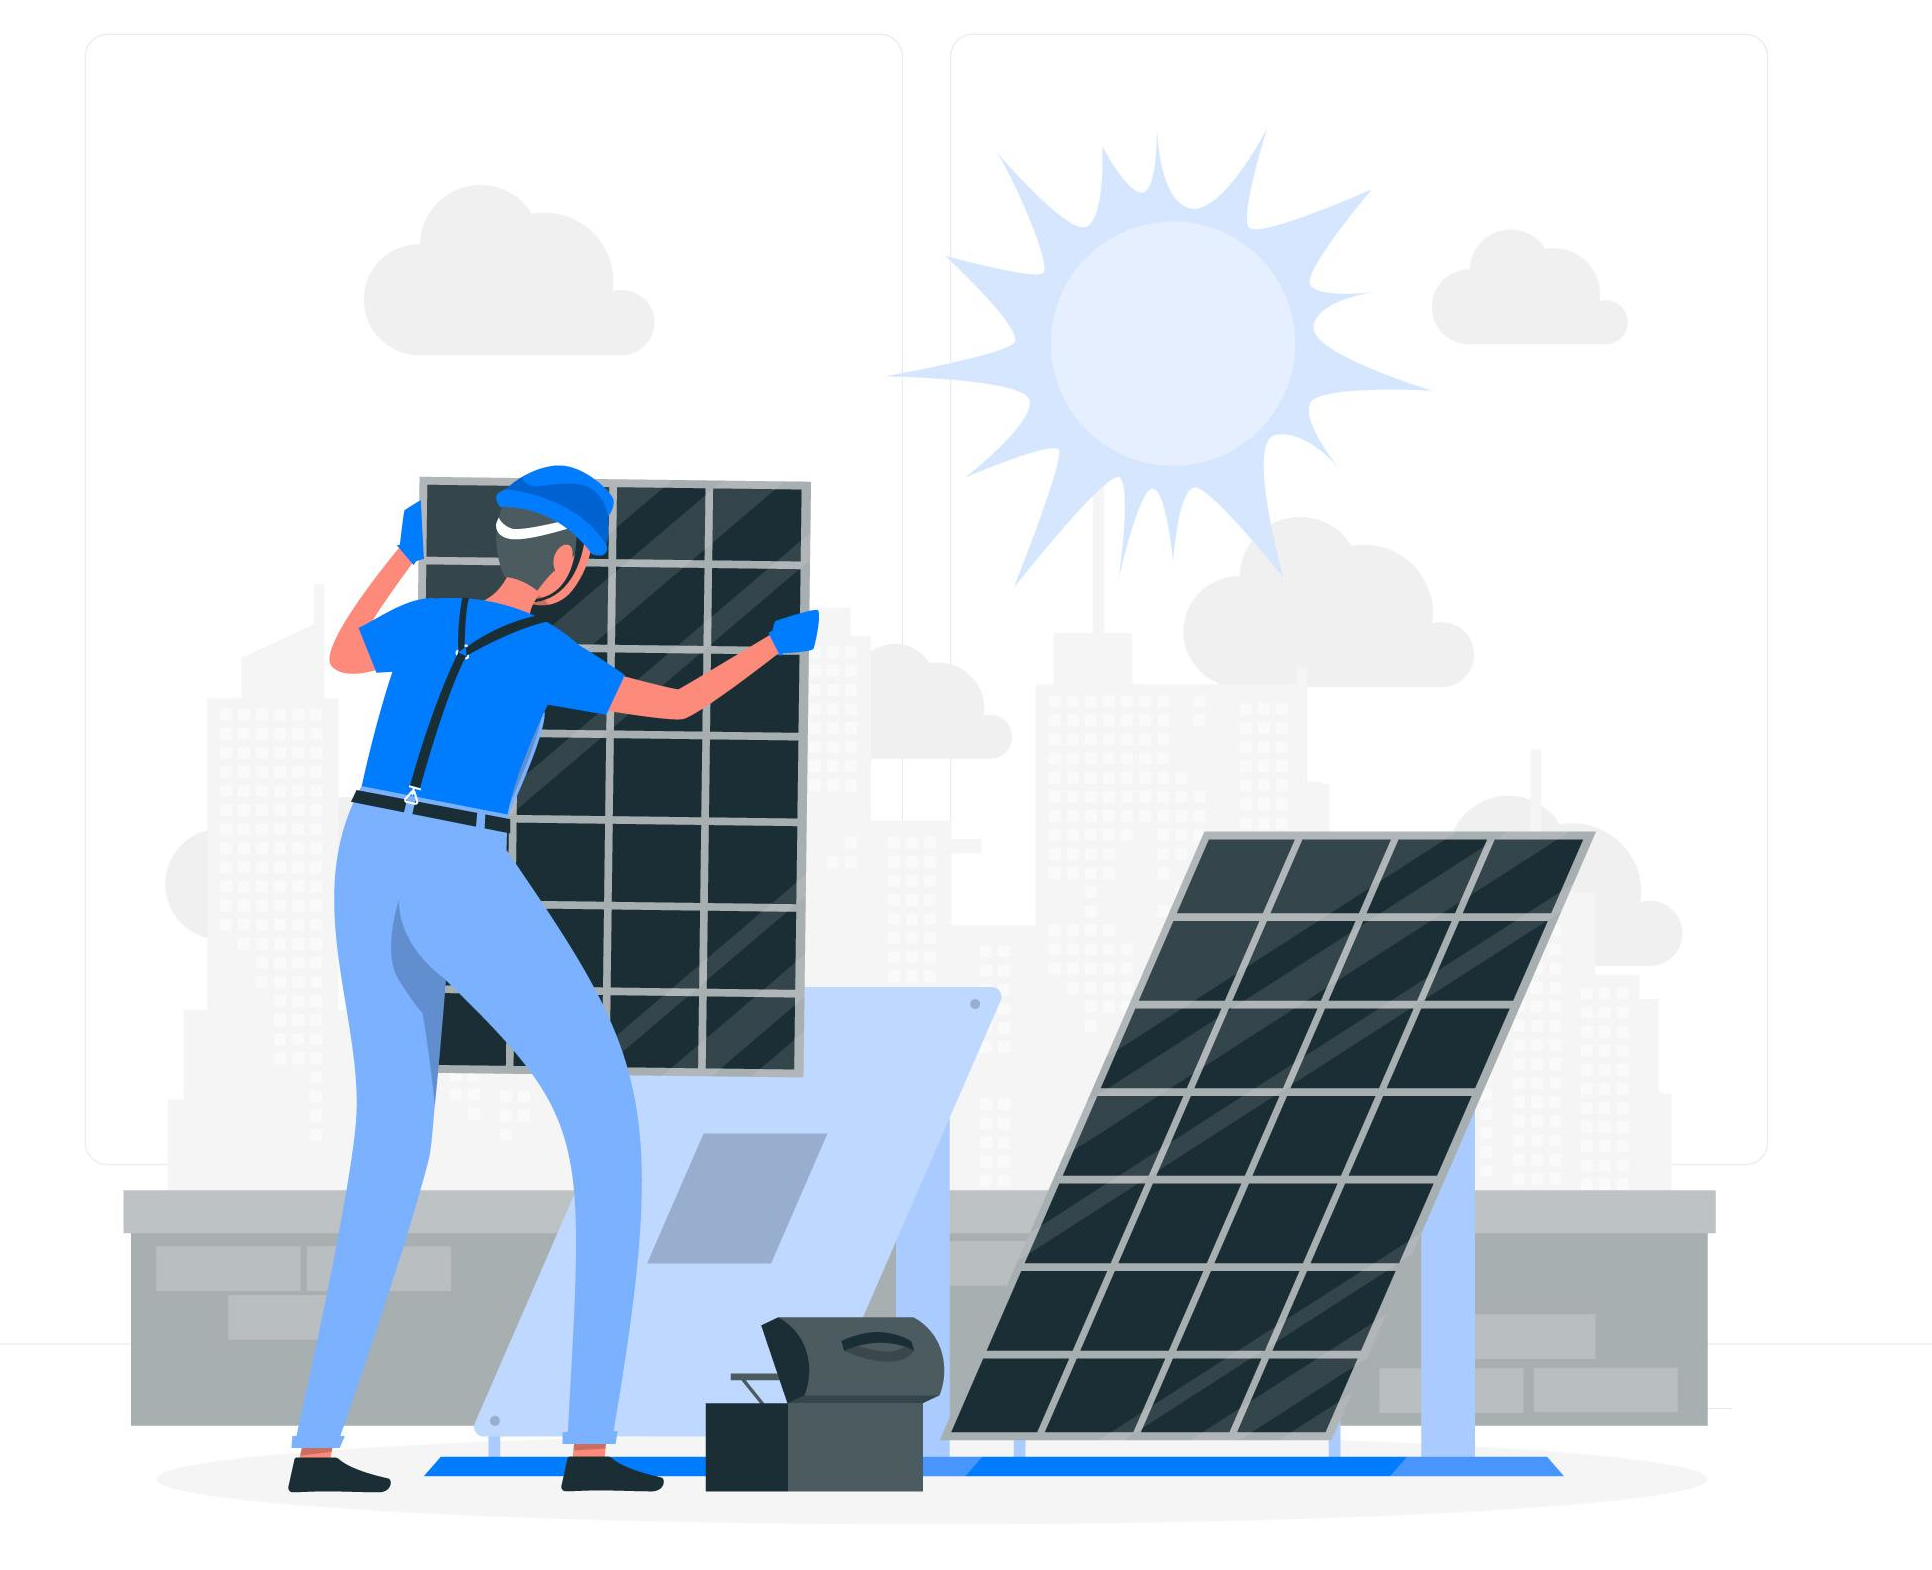 Clear Choice: A technician in a cap and headset inspects solar panels with a digital tablet, standing in an urban setting with buildings and a stylized sun in the background.